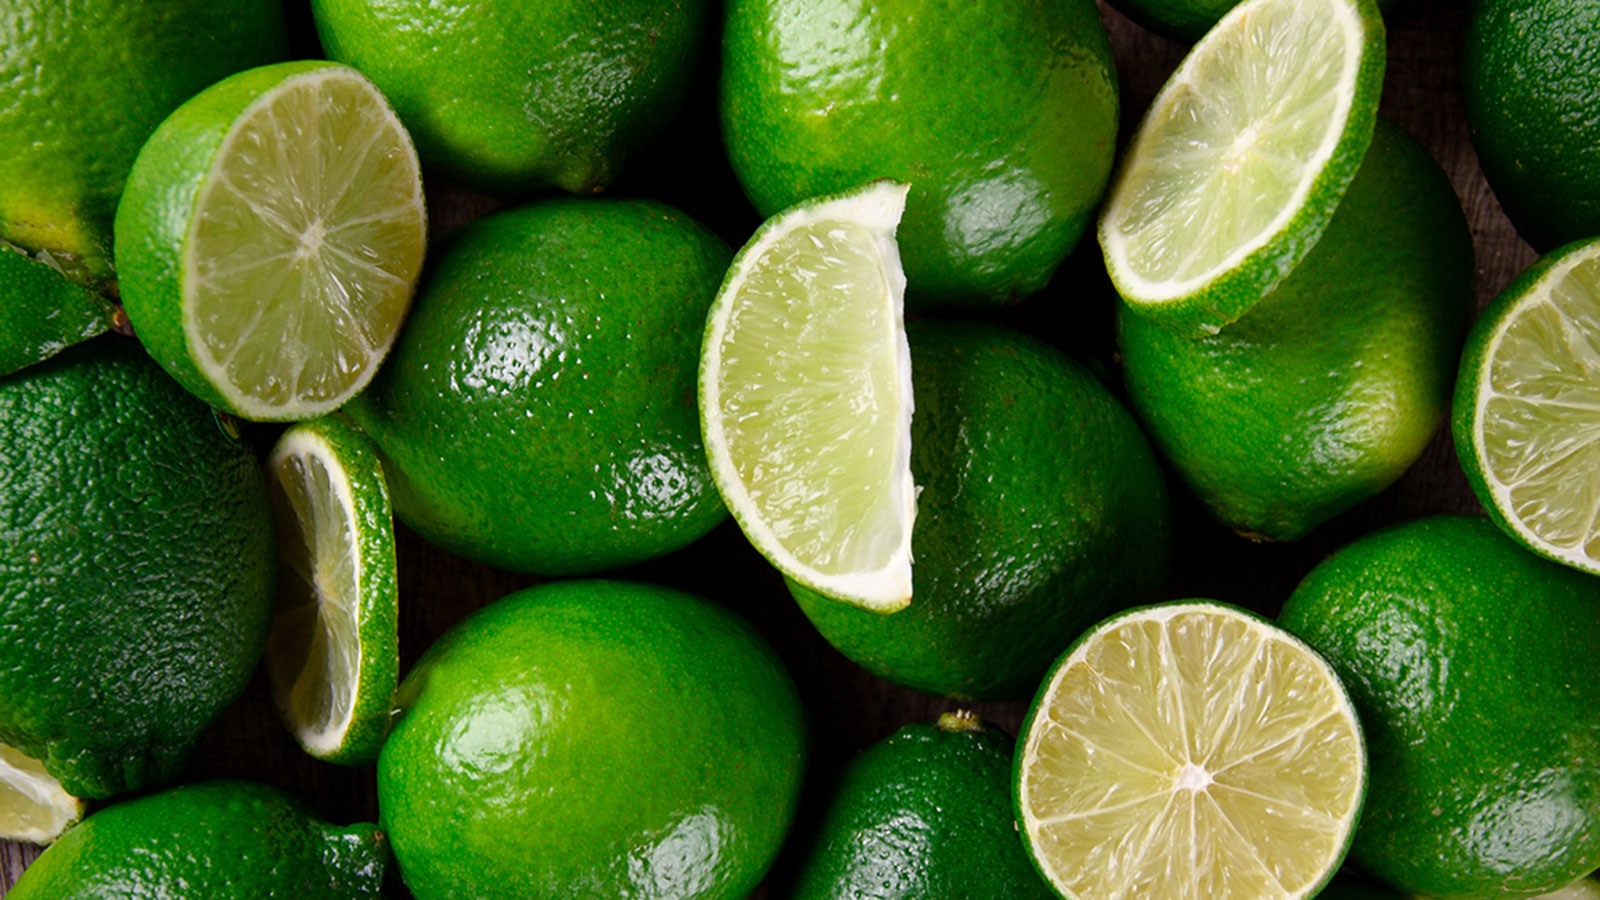 🍓 Sorry, But If You Can’t Pass This Plural Word Test, You Can Never Have Fruits Again Limes